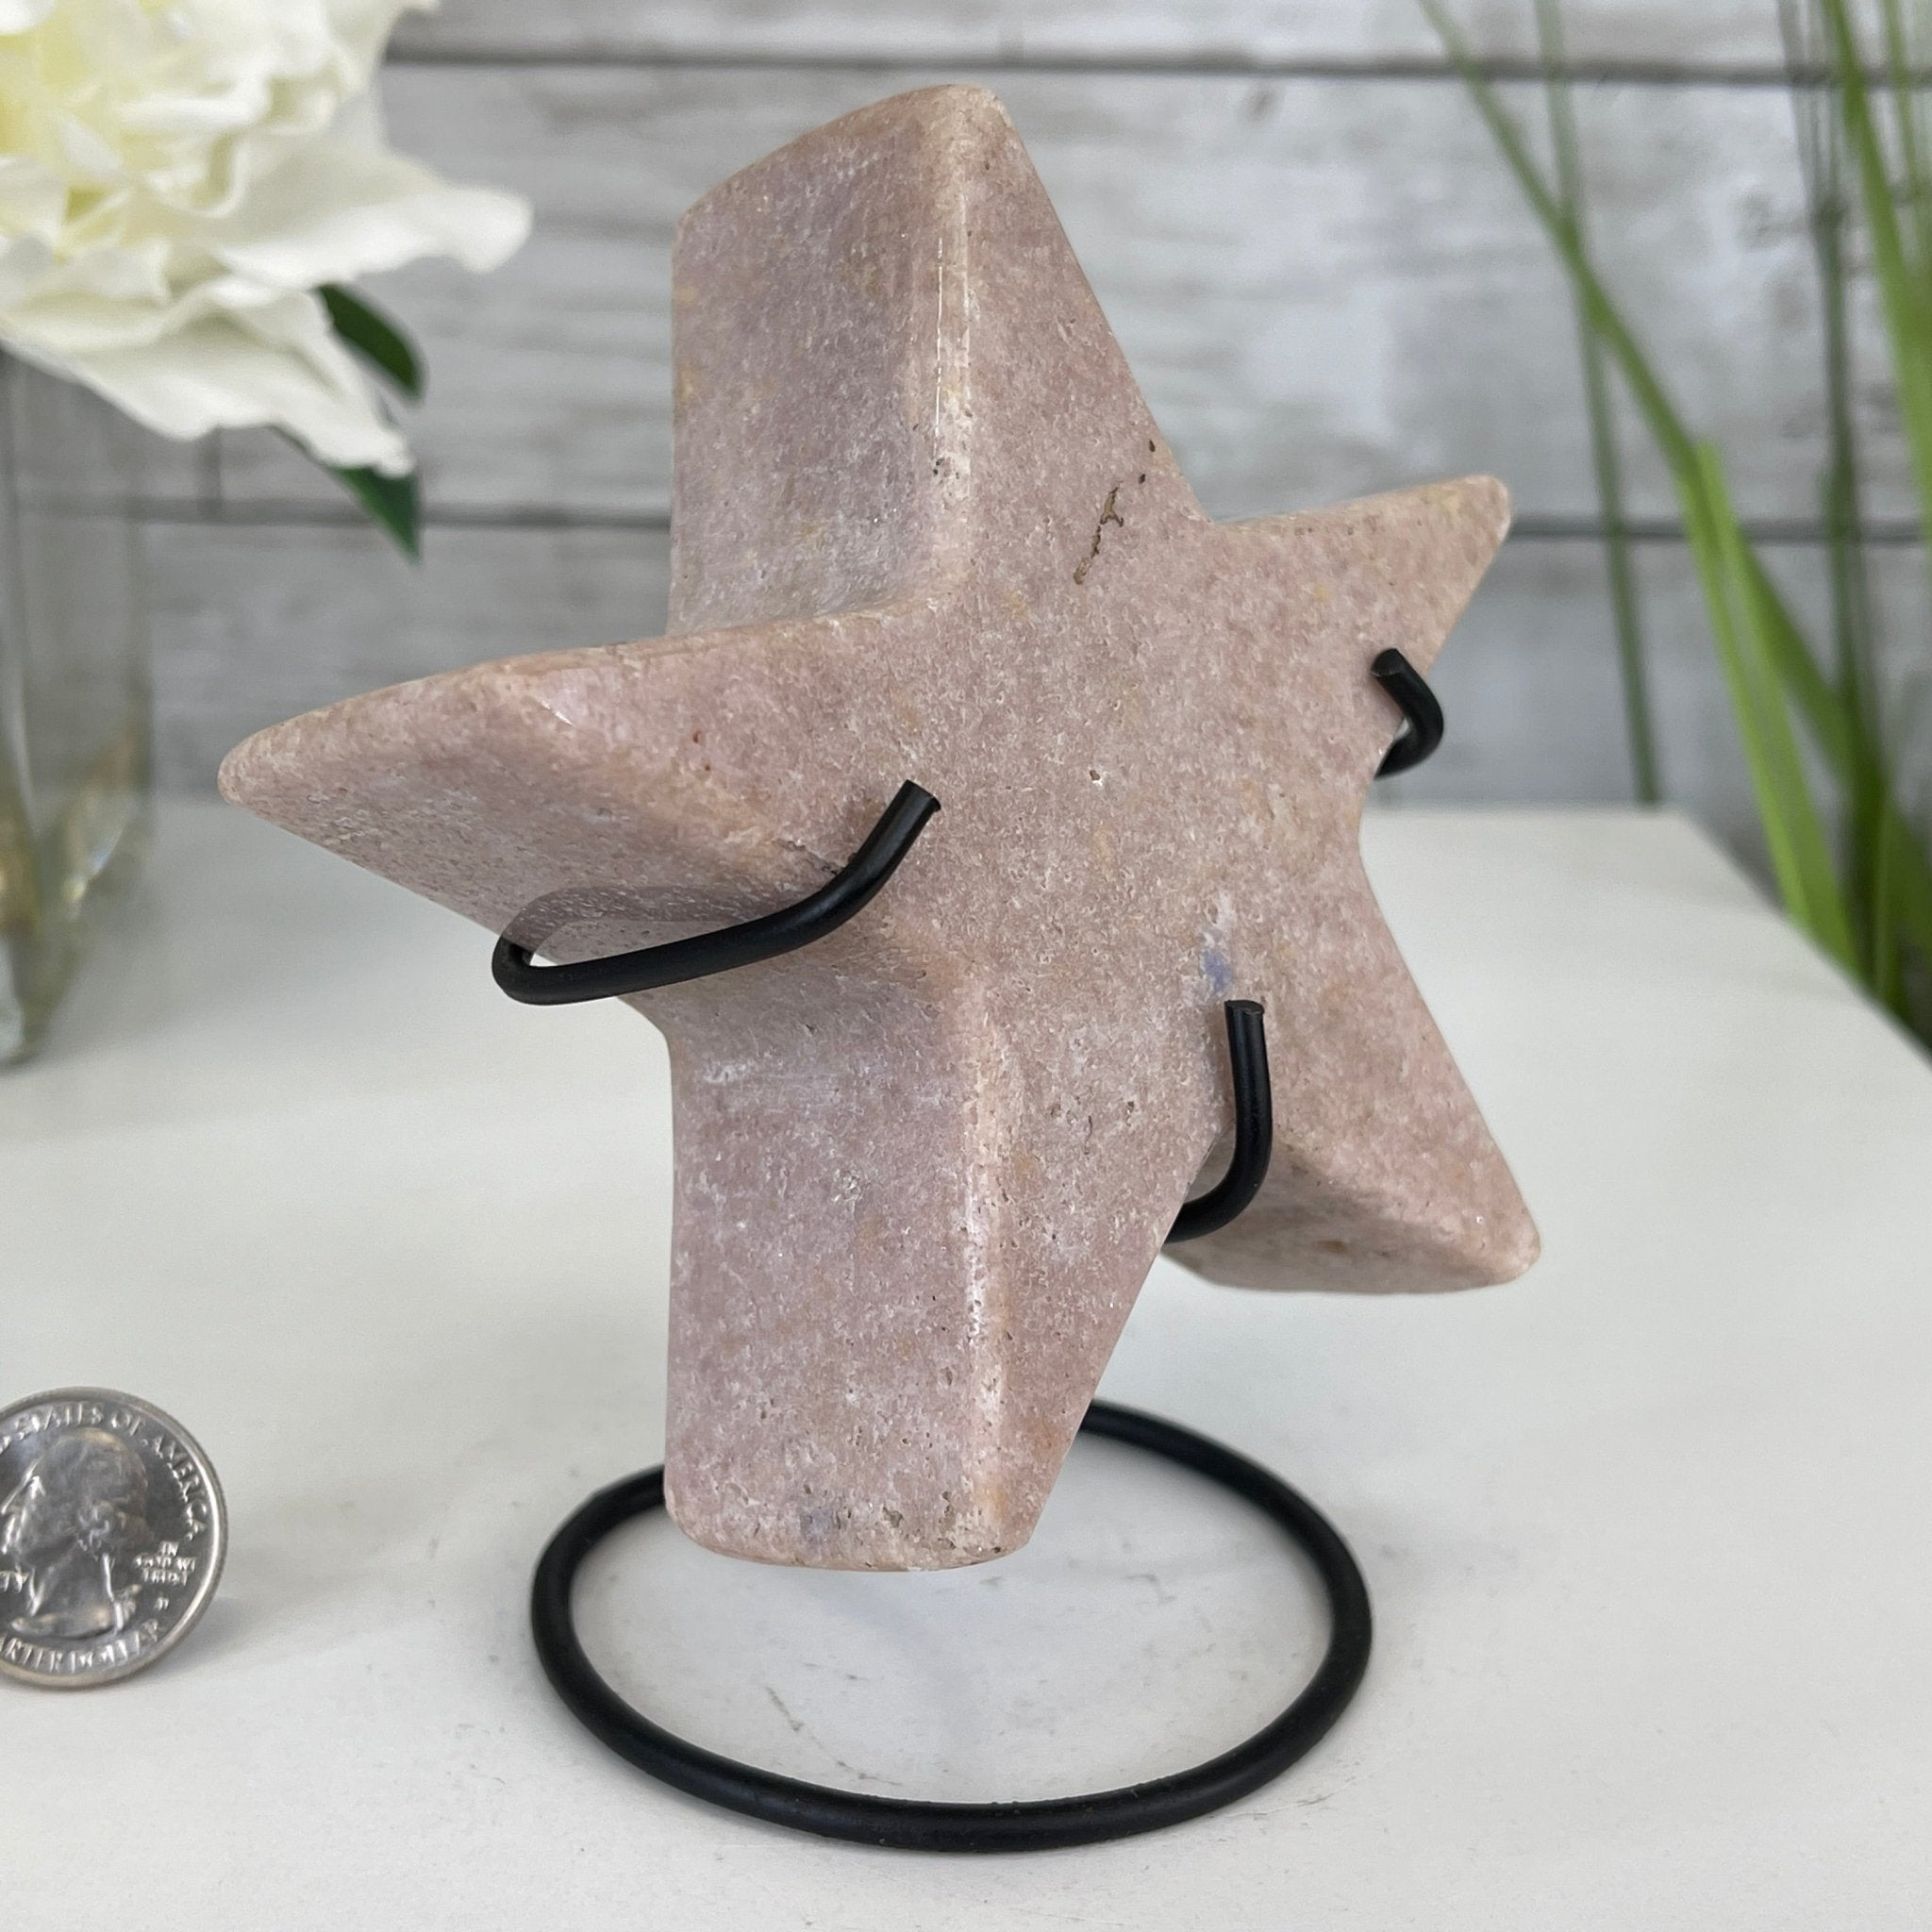 Pink Amethyst Star on a Metal Stand 5.25" Tall #5746-0002 by Brazil Gems - Brazil GemsBrazil GemsPink Amethyst Star on a Metal Stand 5.25" Tall #5746-0002 by Brazil GemsStars5746-0002